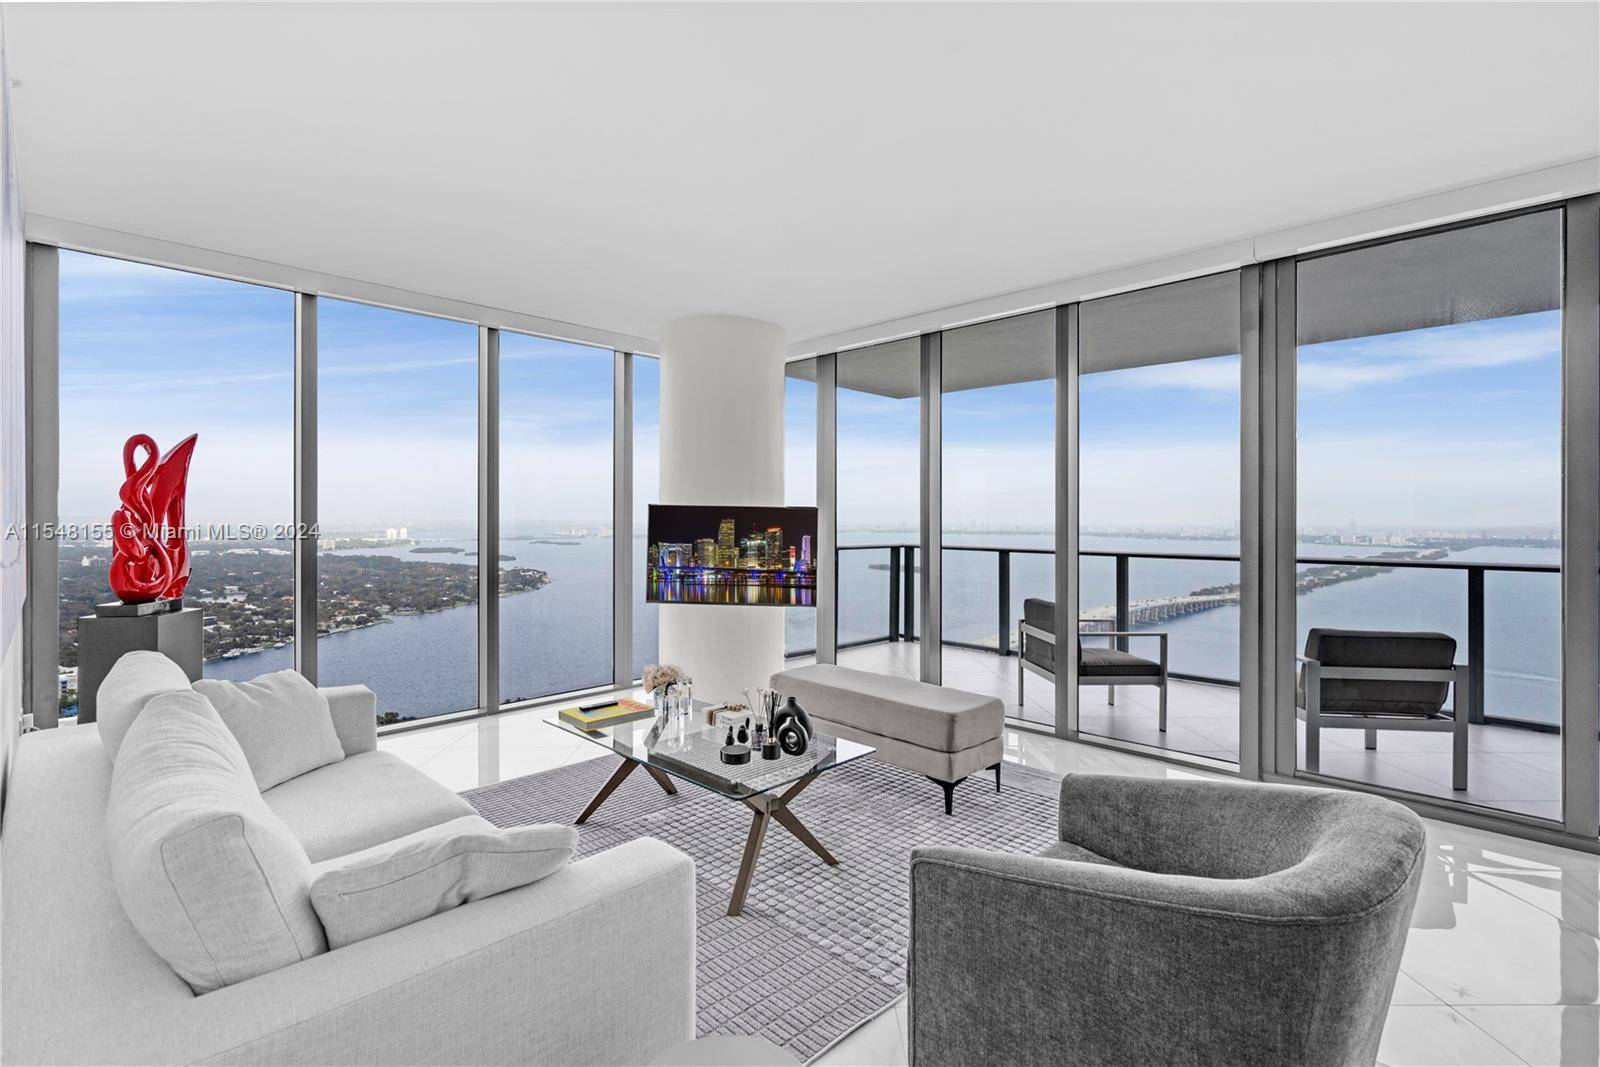 Luxury living at its finest in this exceptional corner unit at One Paraiso.